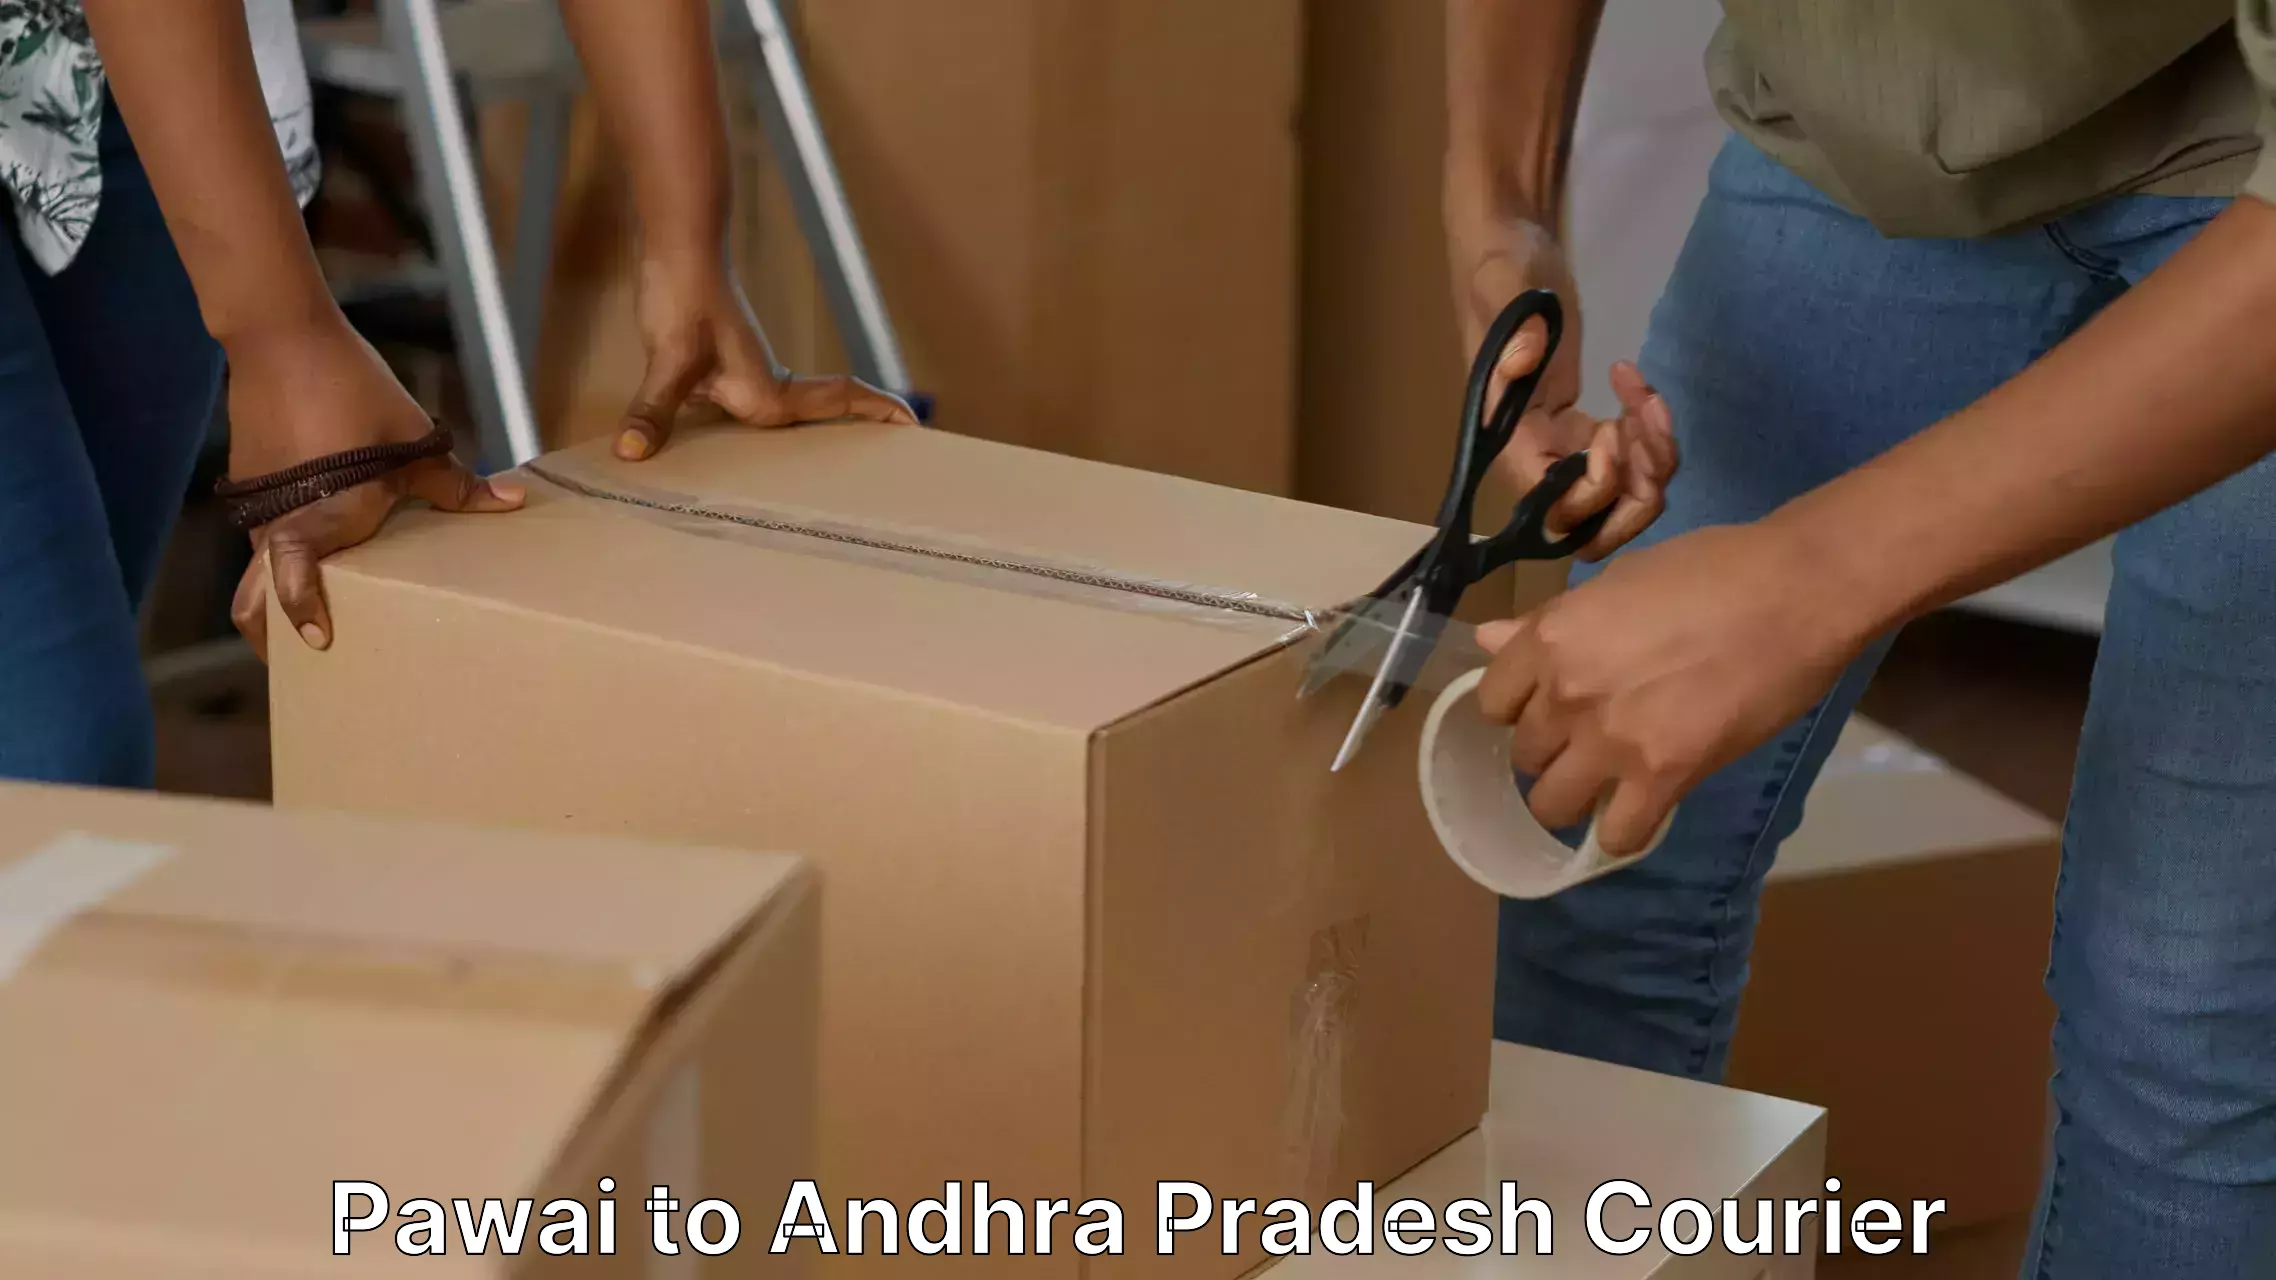 Quality relocation assistance Pawai to Mangalagiri